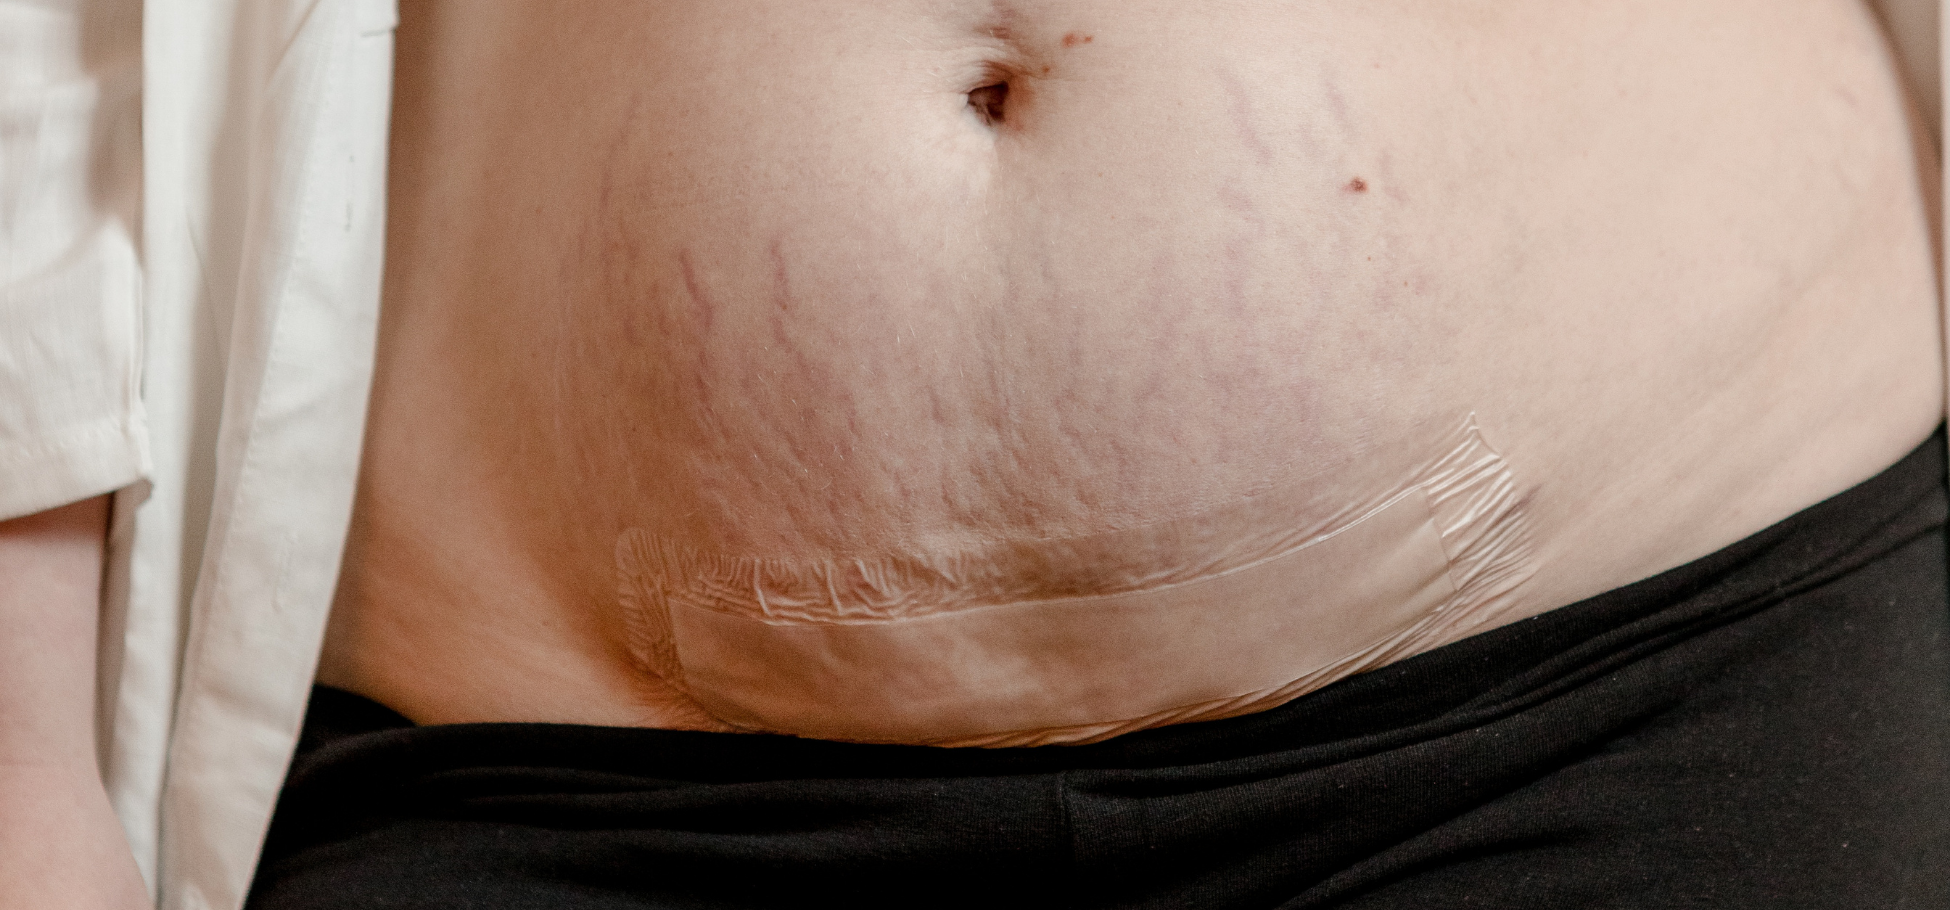 C-Section Scar Care and Treatment Guide